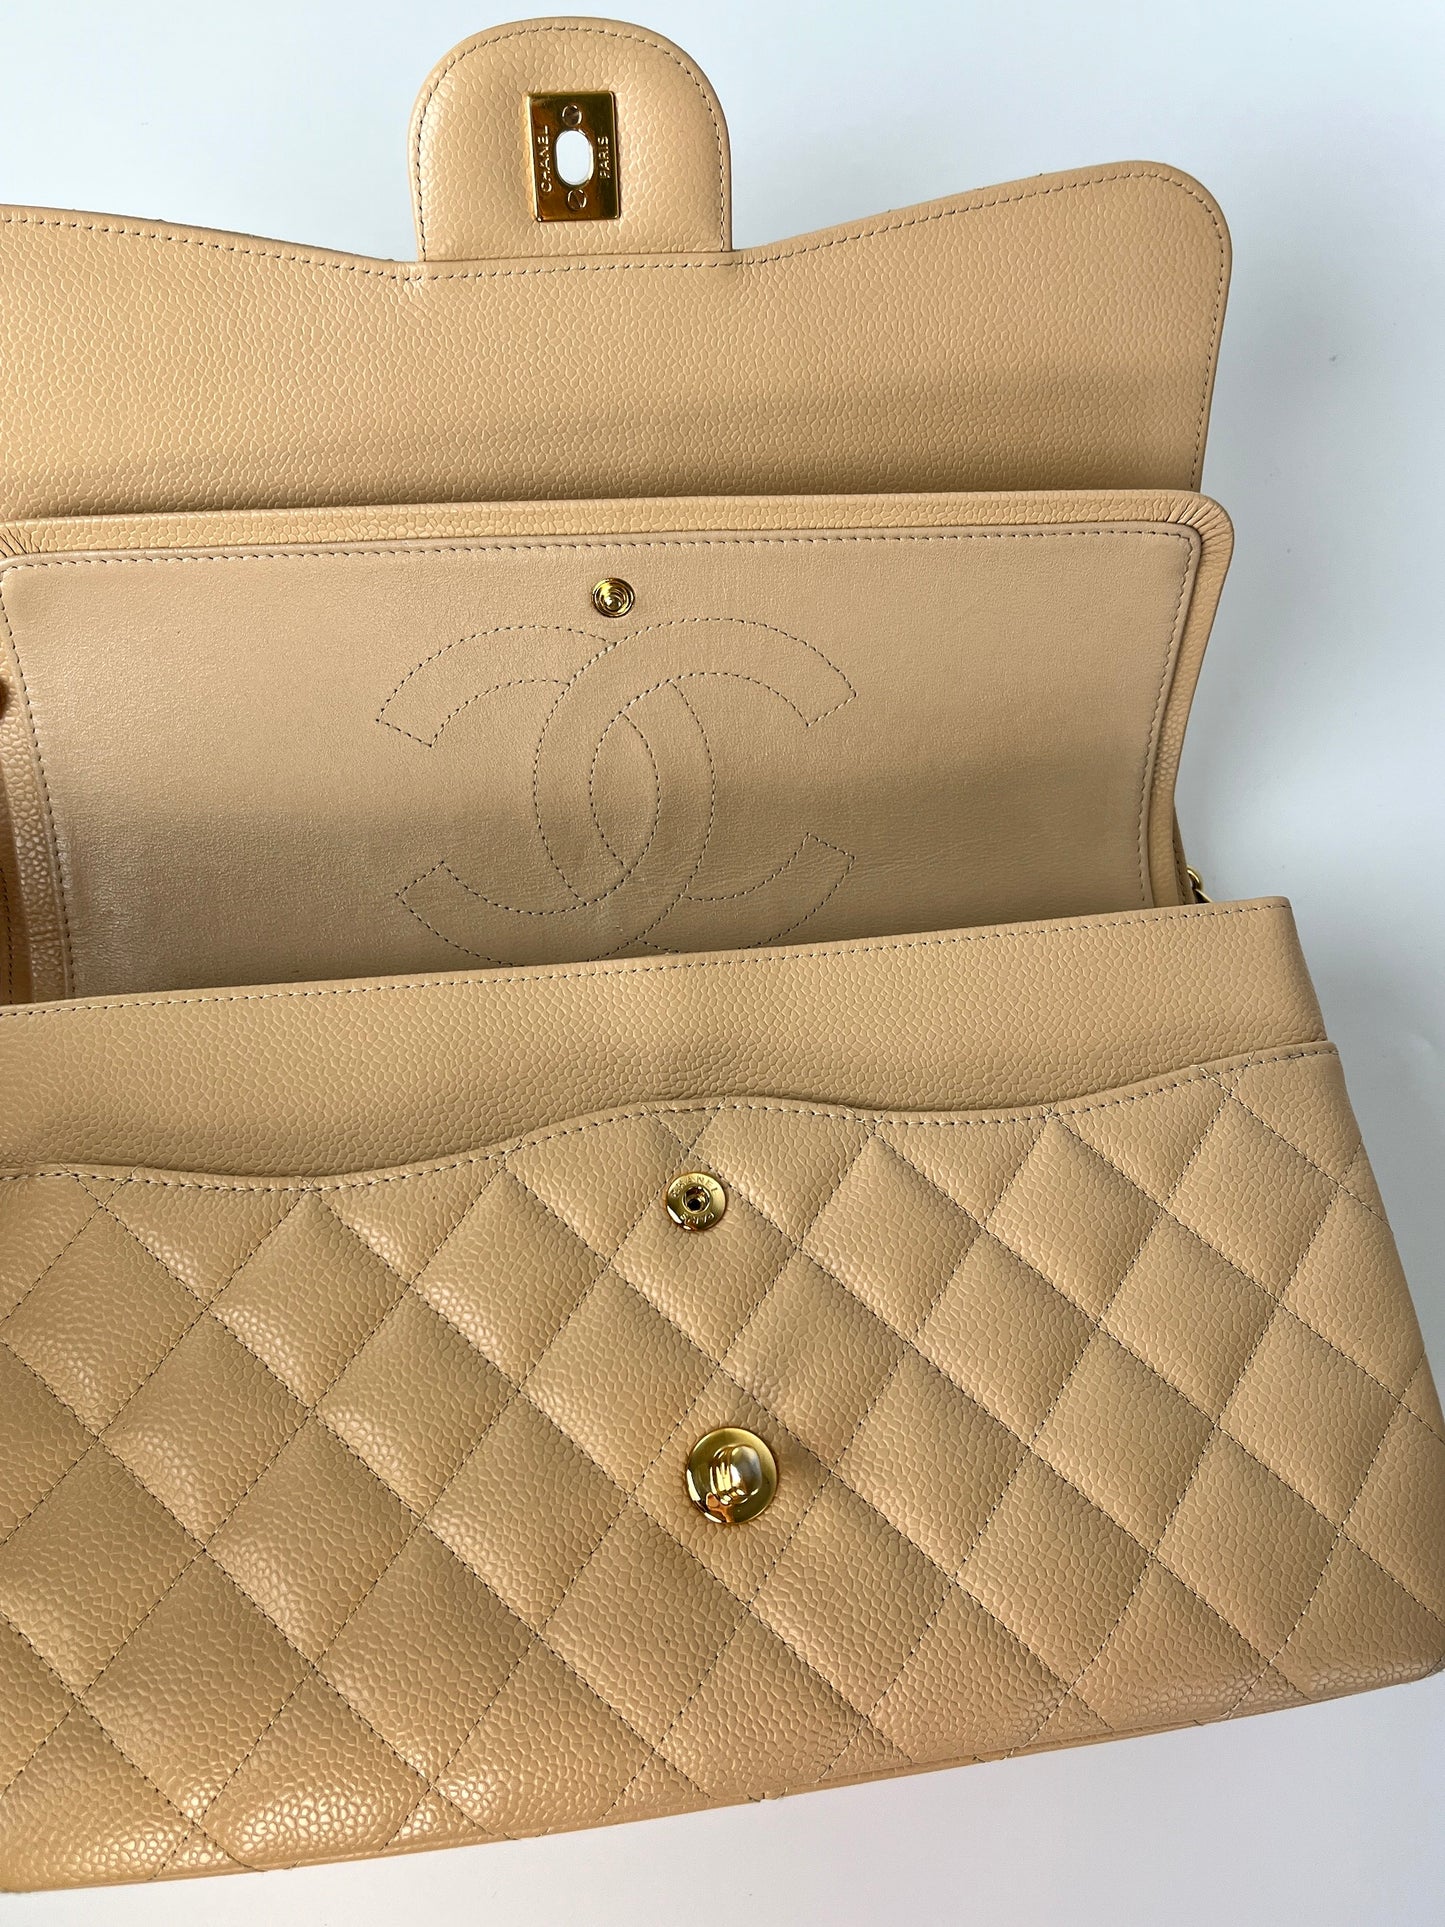 CHANEL Jumbo Classic Double Quilted Caviar Beige Leather Flap Bag